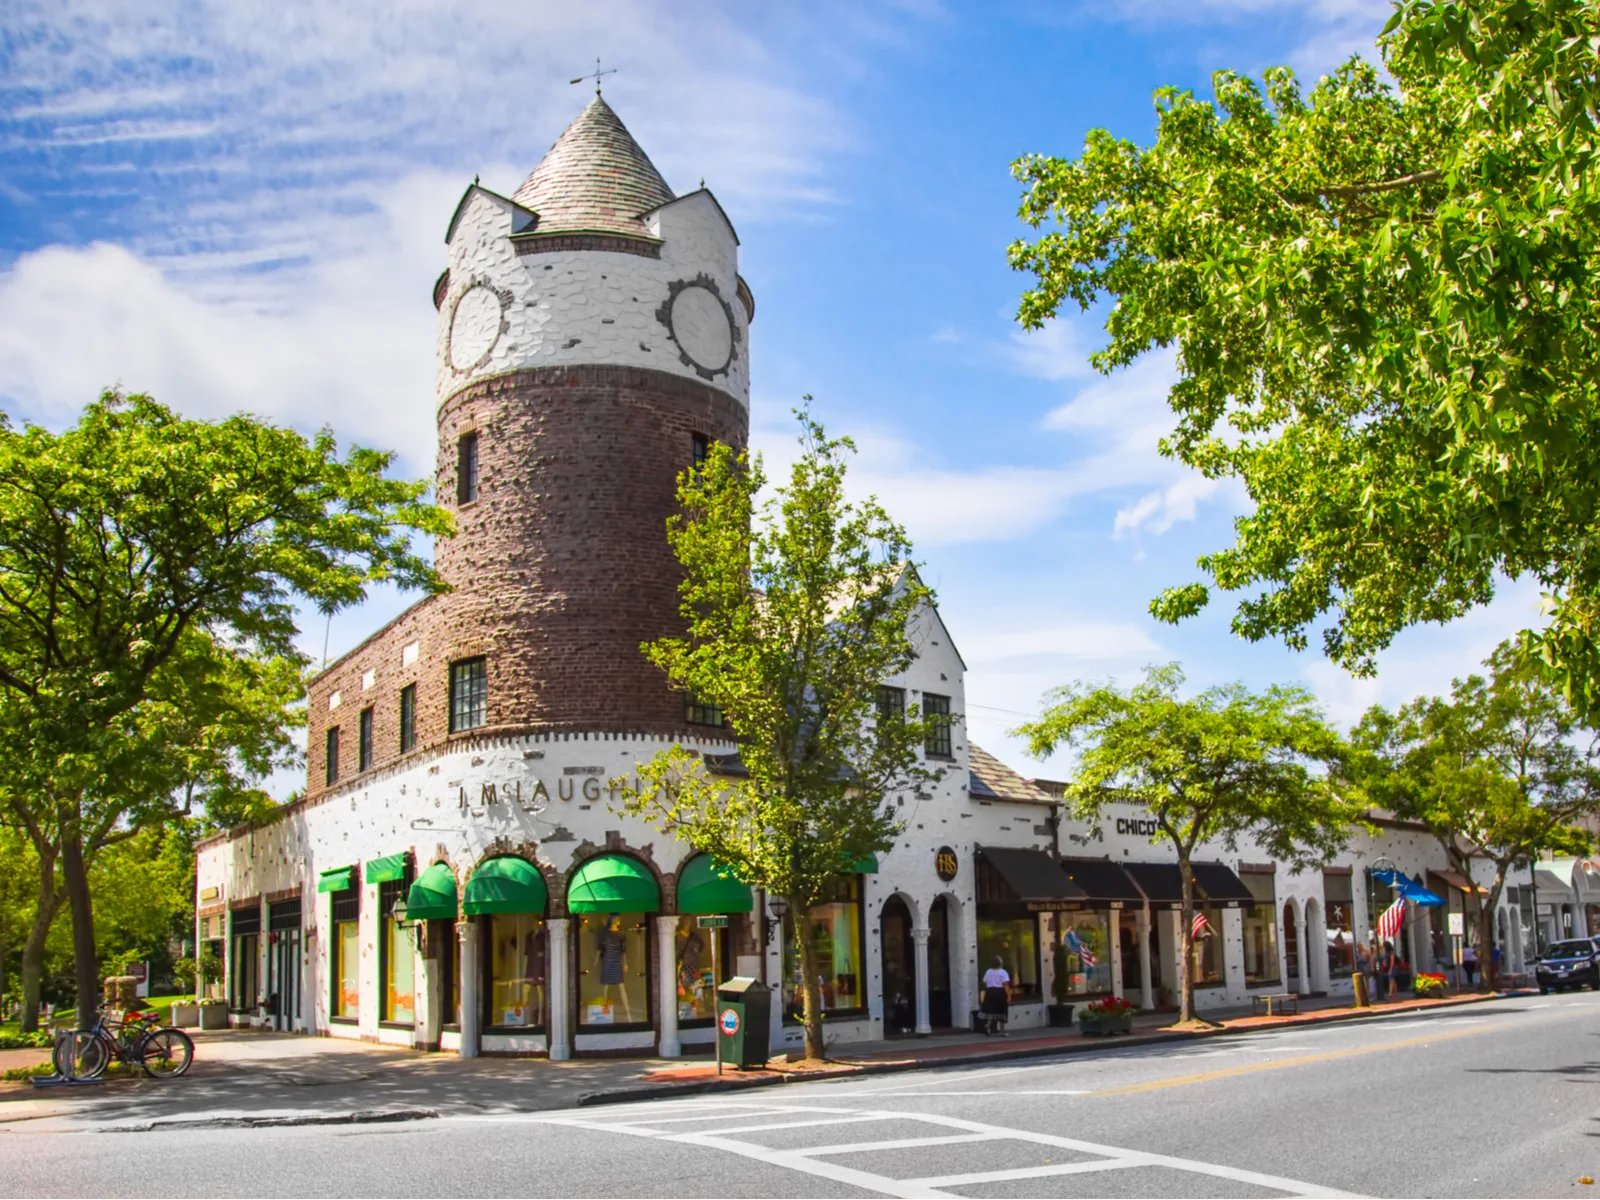 Main Street in Southampton, one of our picks for where to stay in the Hamptons